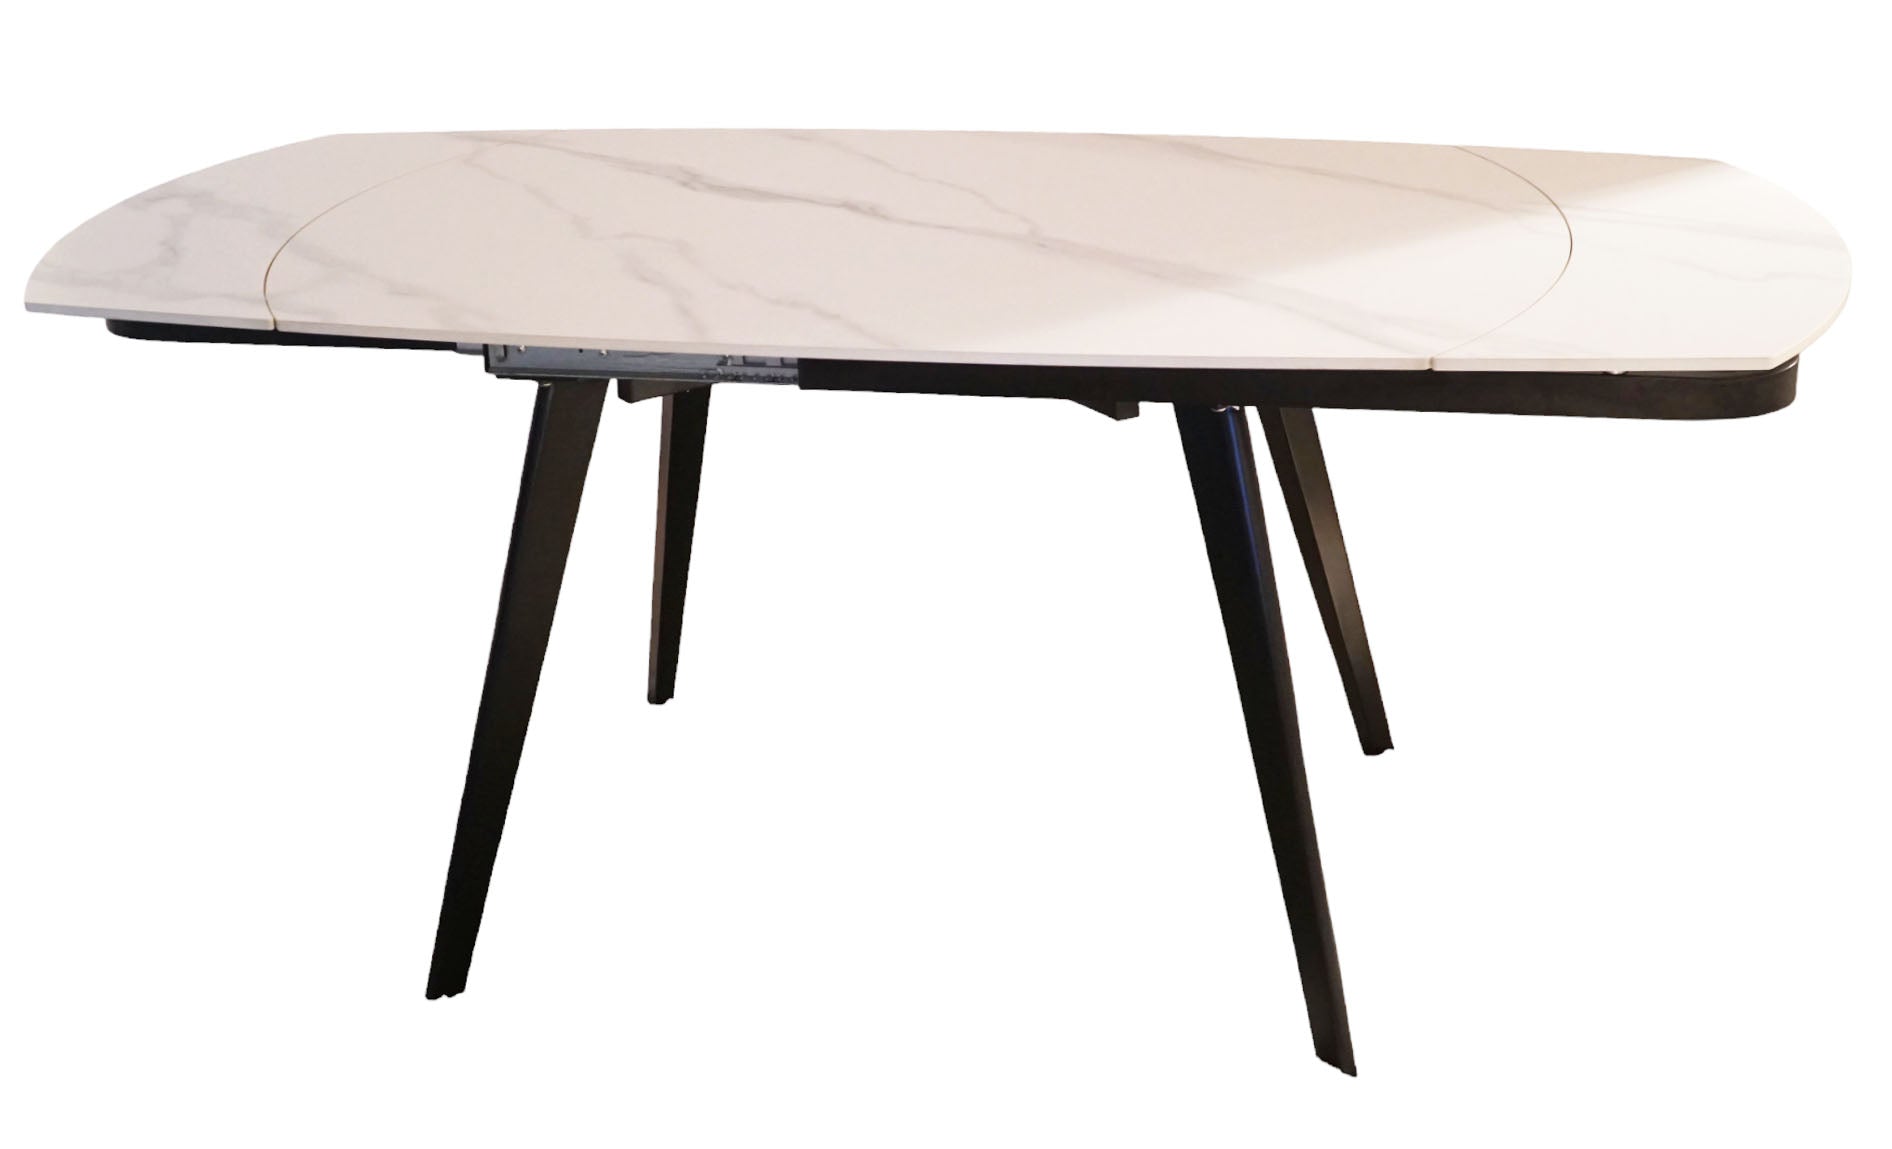 Clay Sintered Stone Dining Table - MJM Furniture